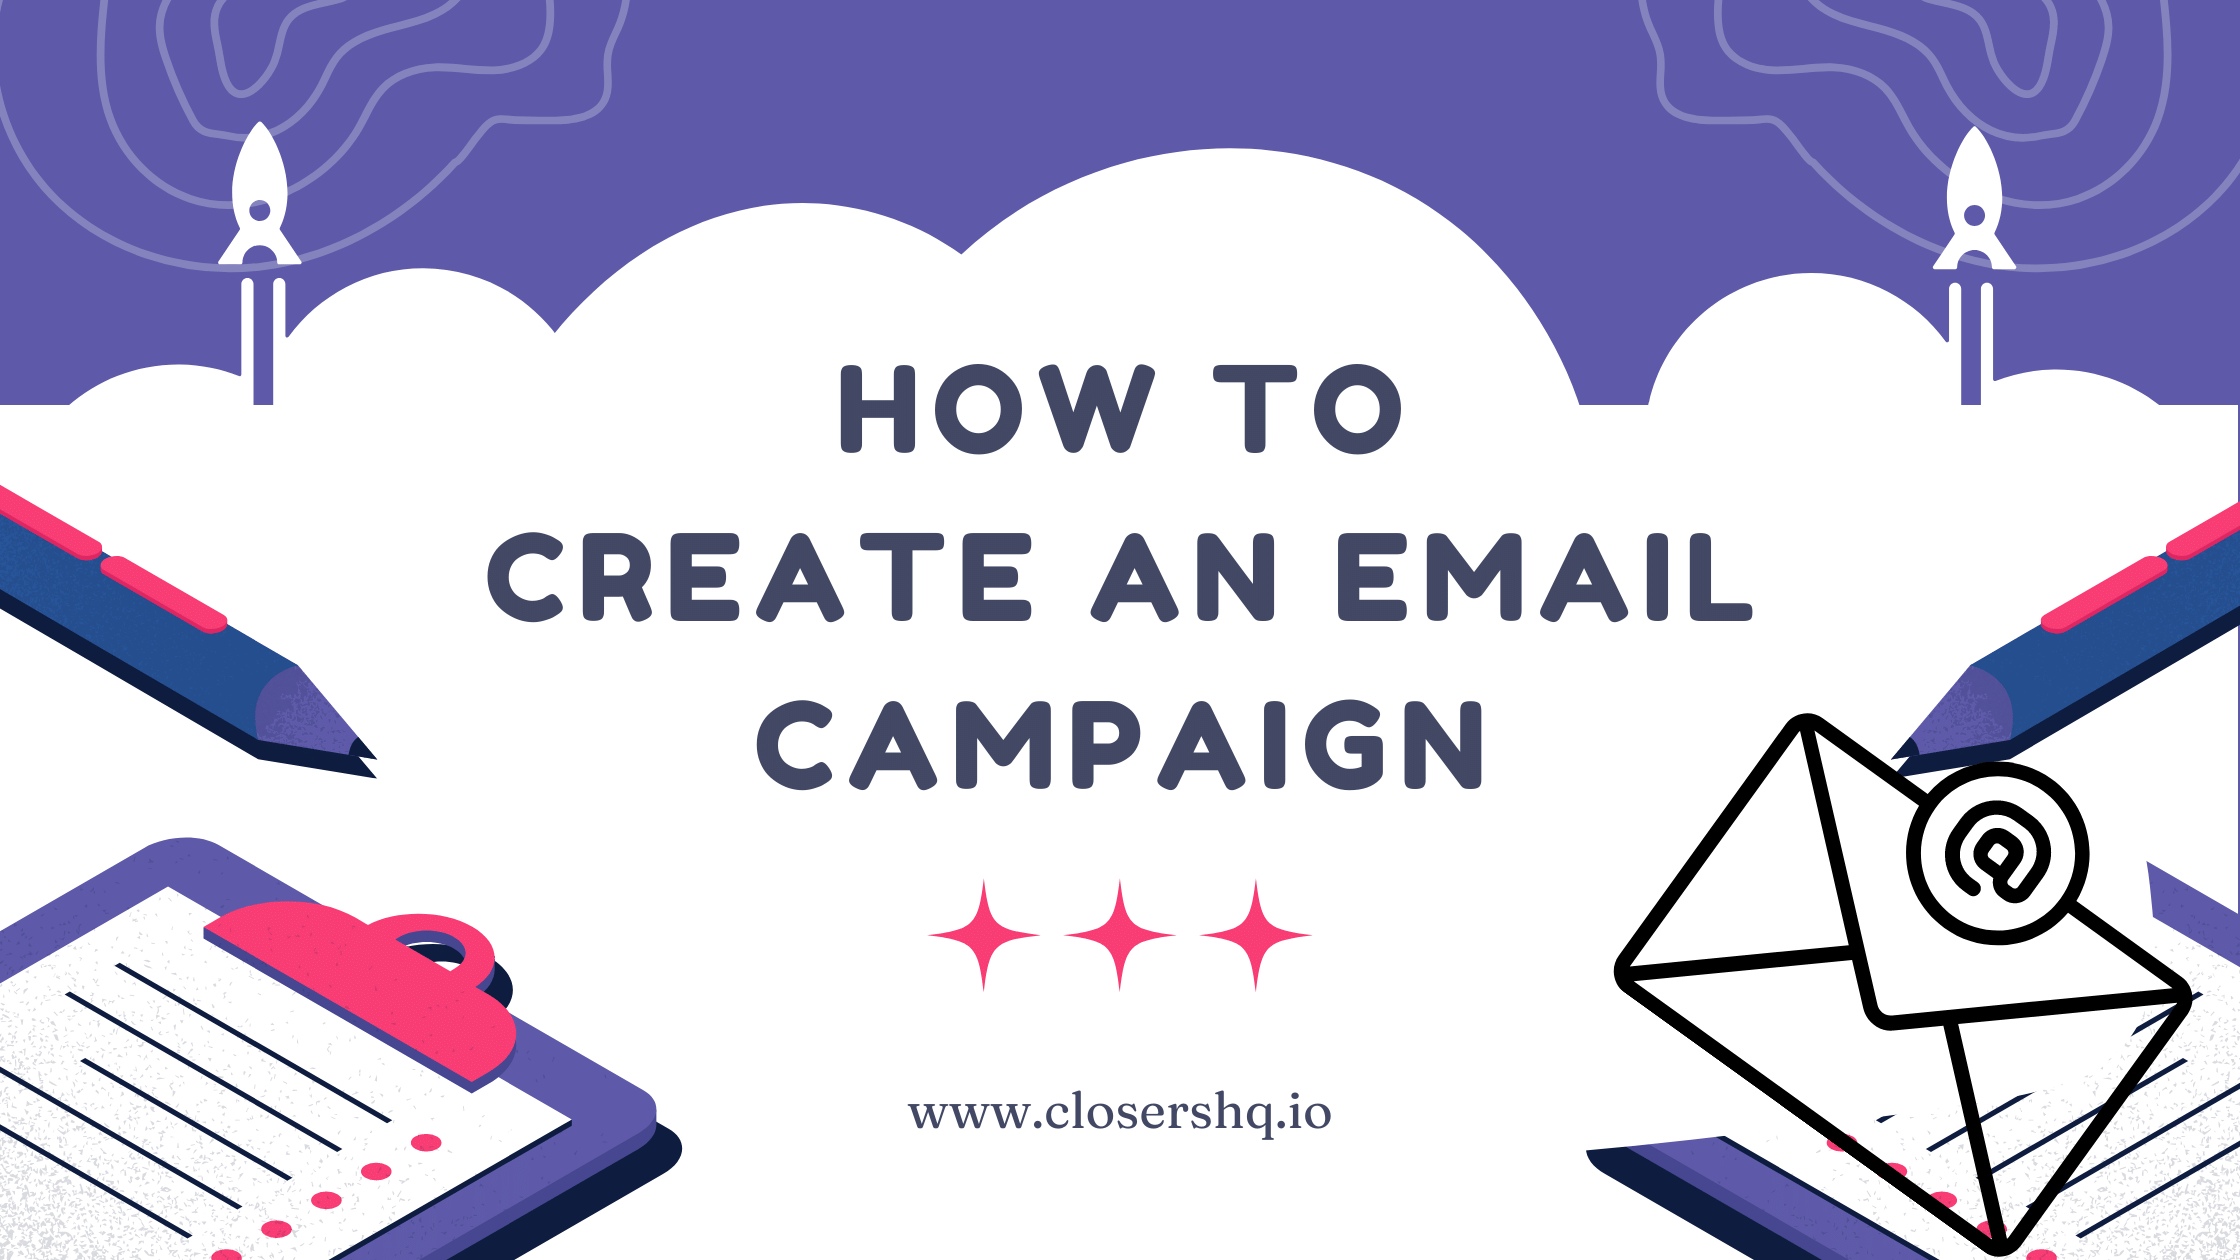 How to Create an Email Campaign